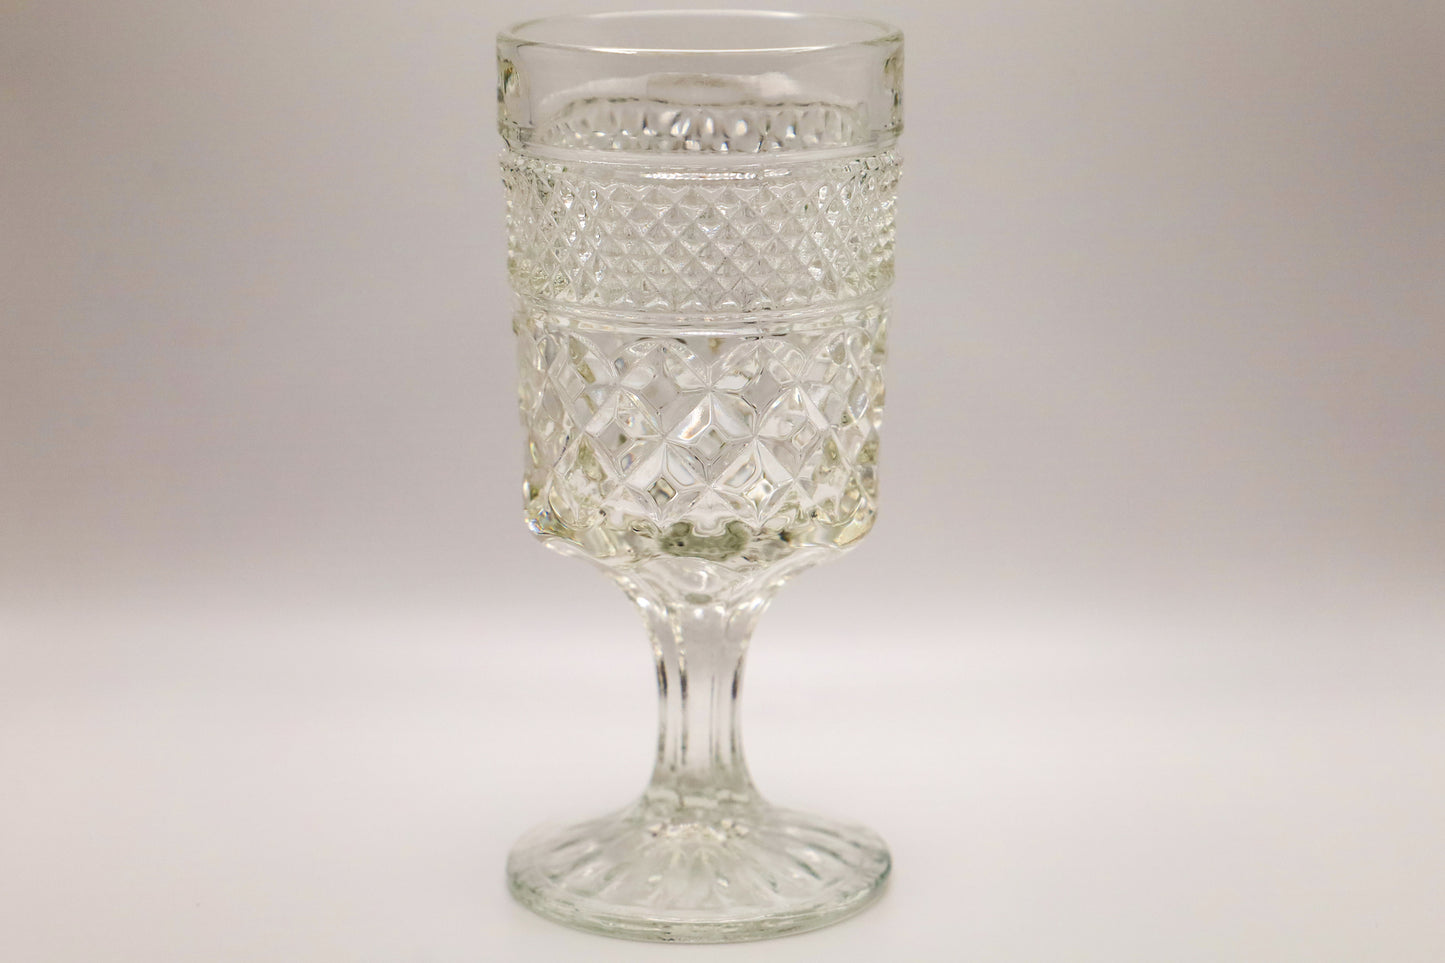 Wexford Water Goblet by Anchor Hocking